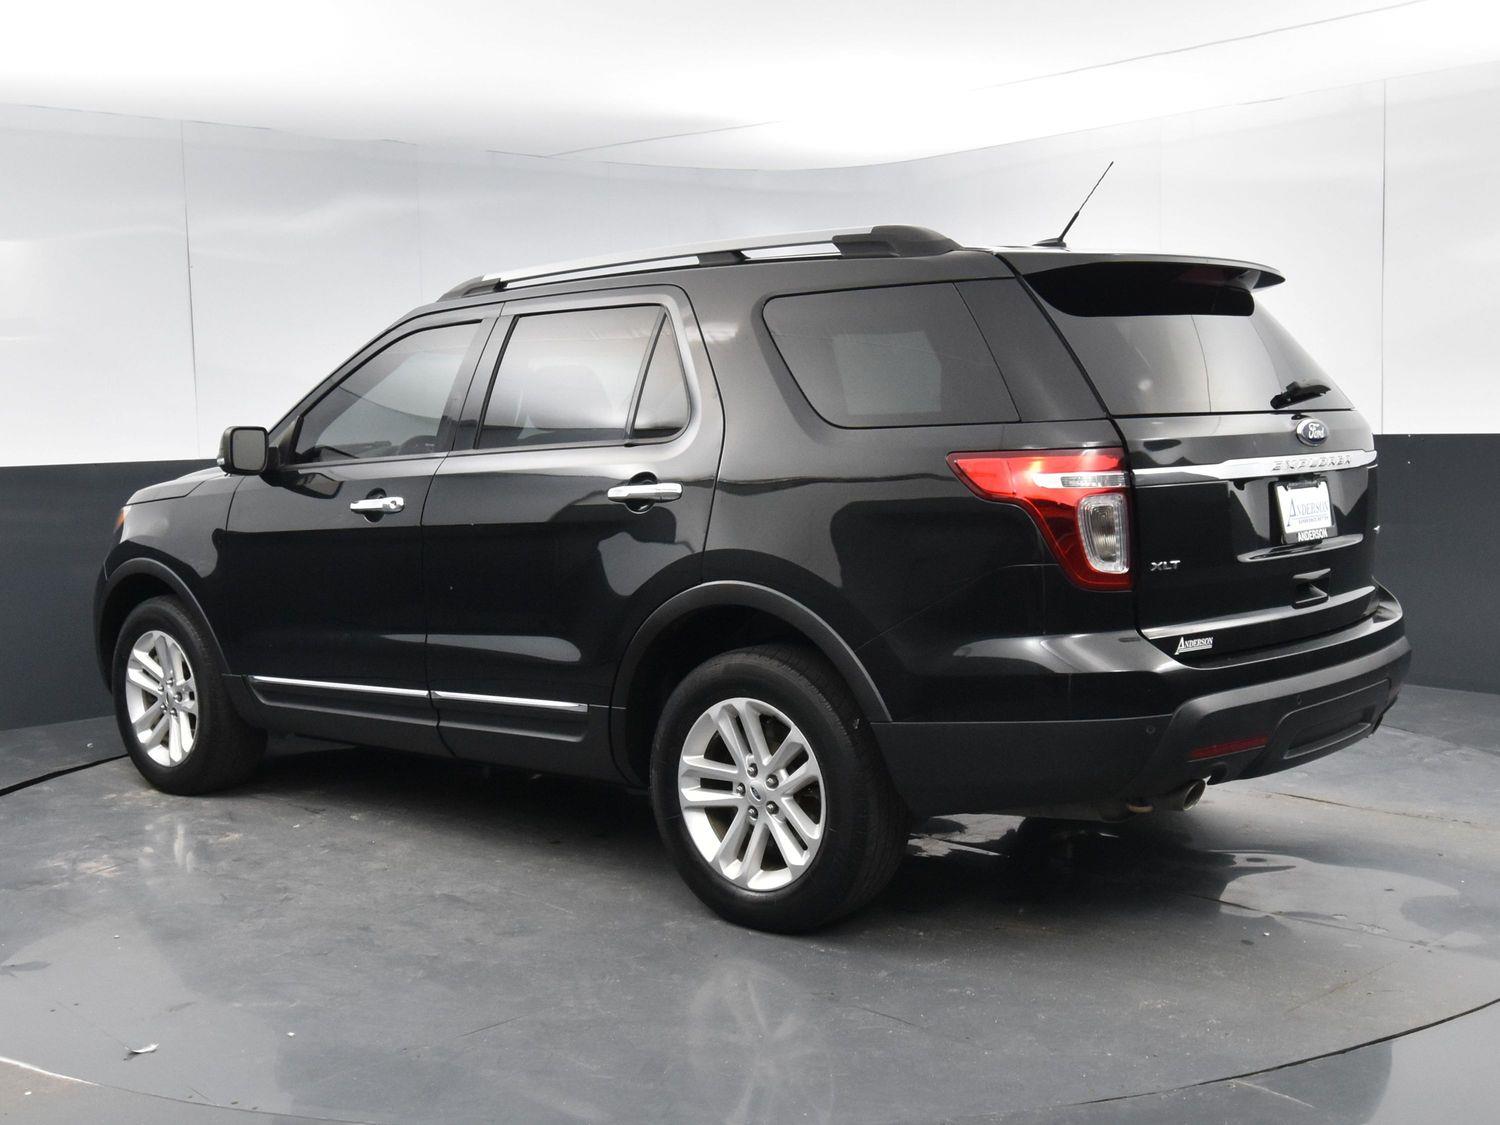 Used 2015 Ford Explorer XLT SUV for sale in Grand Island NE